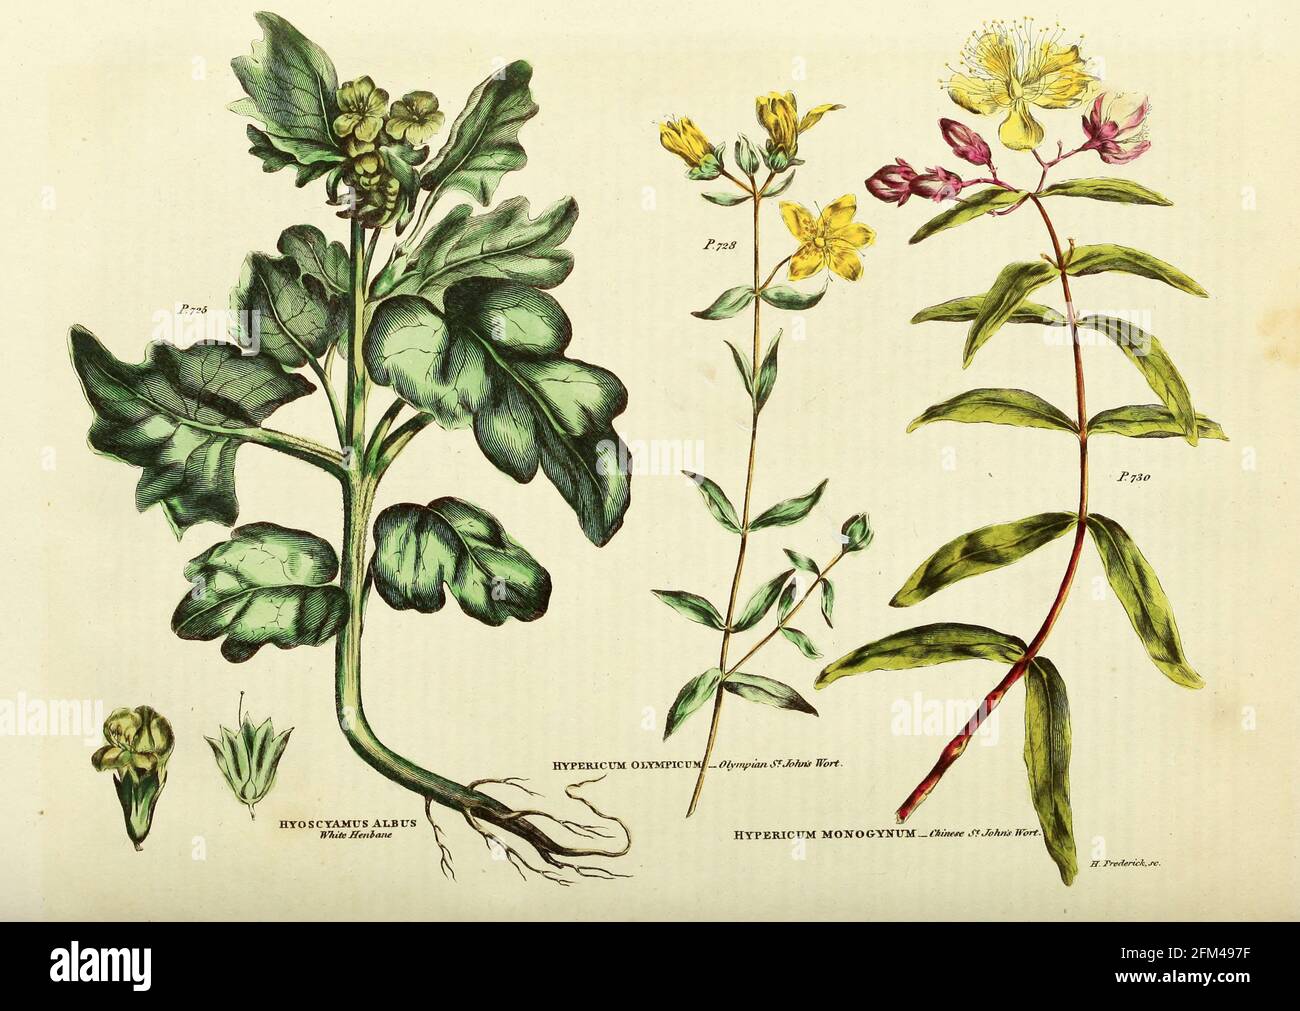 Hyoscyamus albus [White Henbane] Hypericum olympicum [Olympian St. John's Wort] Hypericum monogynum [Chinese St. John's Wort] from Vol 1 of the book The universal herbal : or botanical, medical and agricultural dictionary : containing an account of all known plants in the world, arranged according to the Linnean system. Specifying the uses to which they are or may be applied By Thomas Green,  Published in 1816 by Nuttall, Fisher & Co. in Liverpool and Printed at the Caxton Press by H. Fisher Stock Photo